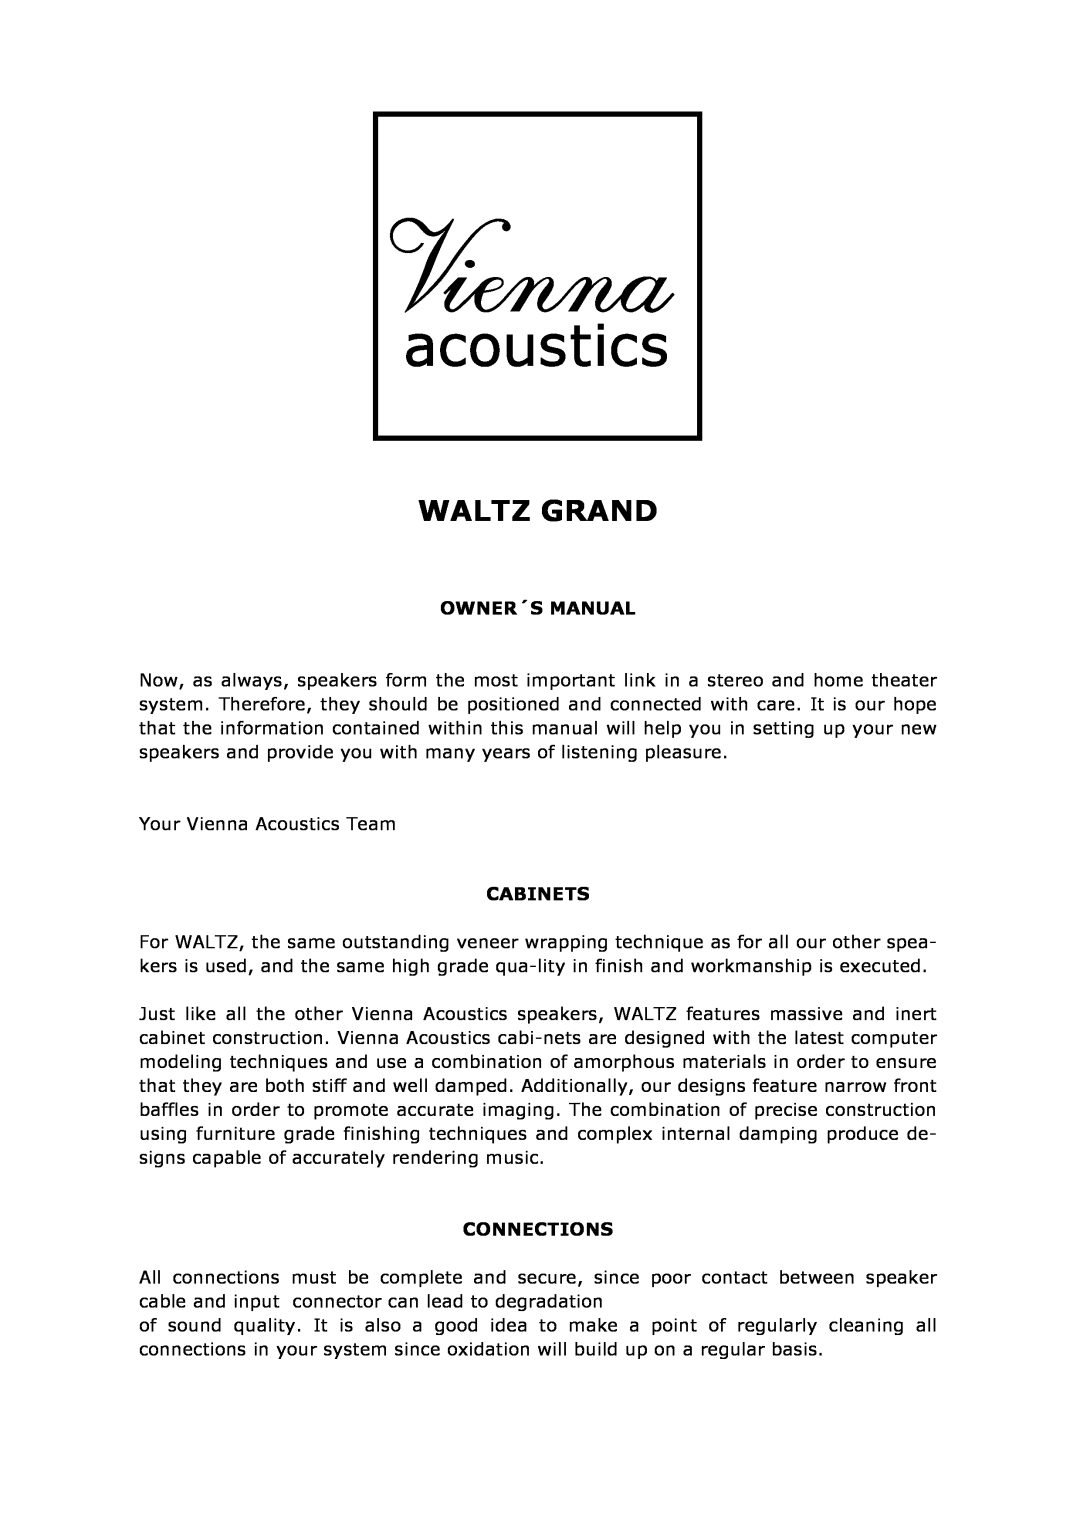 Vienna Acoustics Waltz Grand Series owner manual Owner´S Manual, Cabinets, Connections 